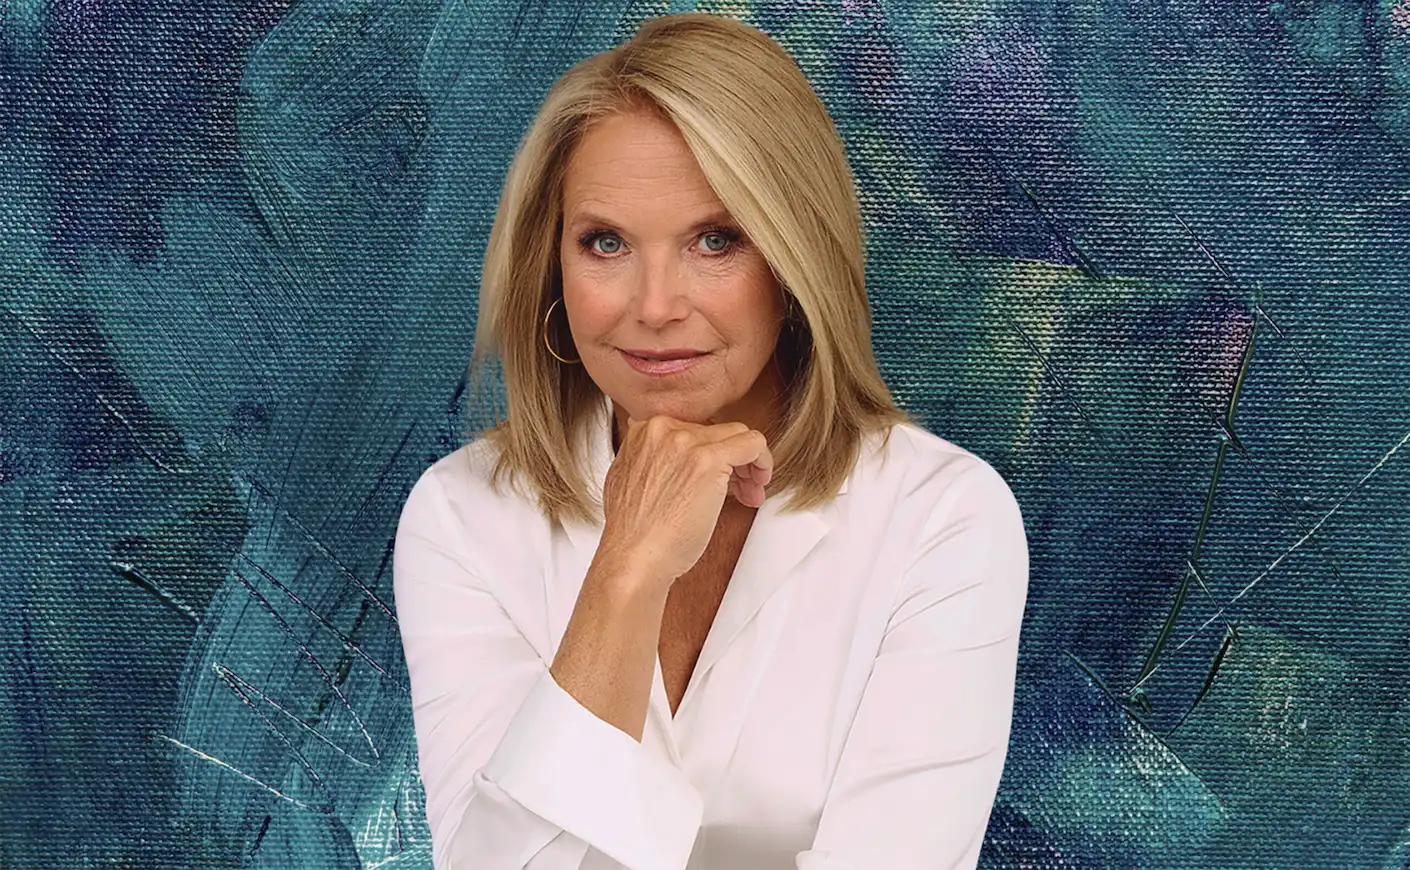 Katie Couric has been diagnosed with breast cancer